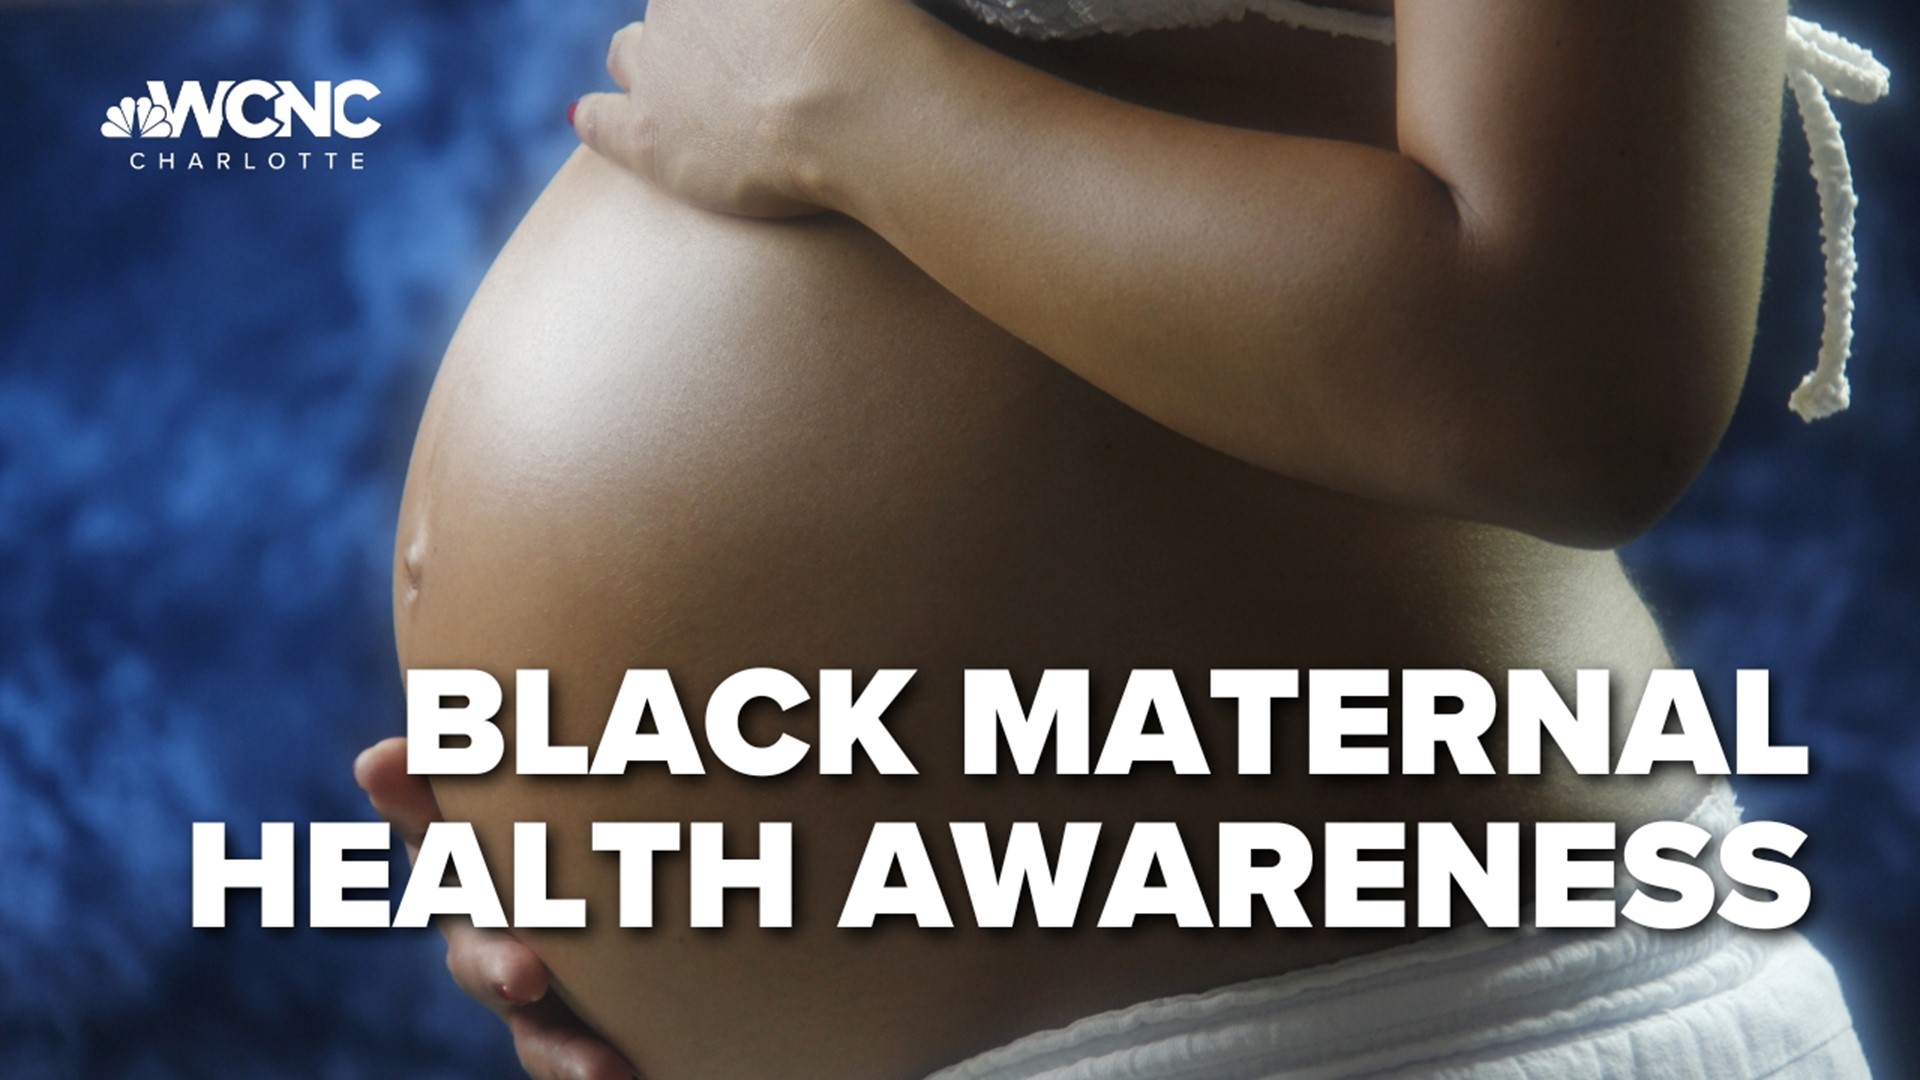 The week is aimed at raising awareness for the disparities Black women face before, during and after pregnancy.